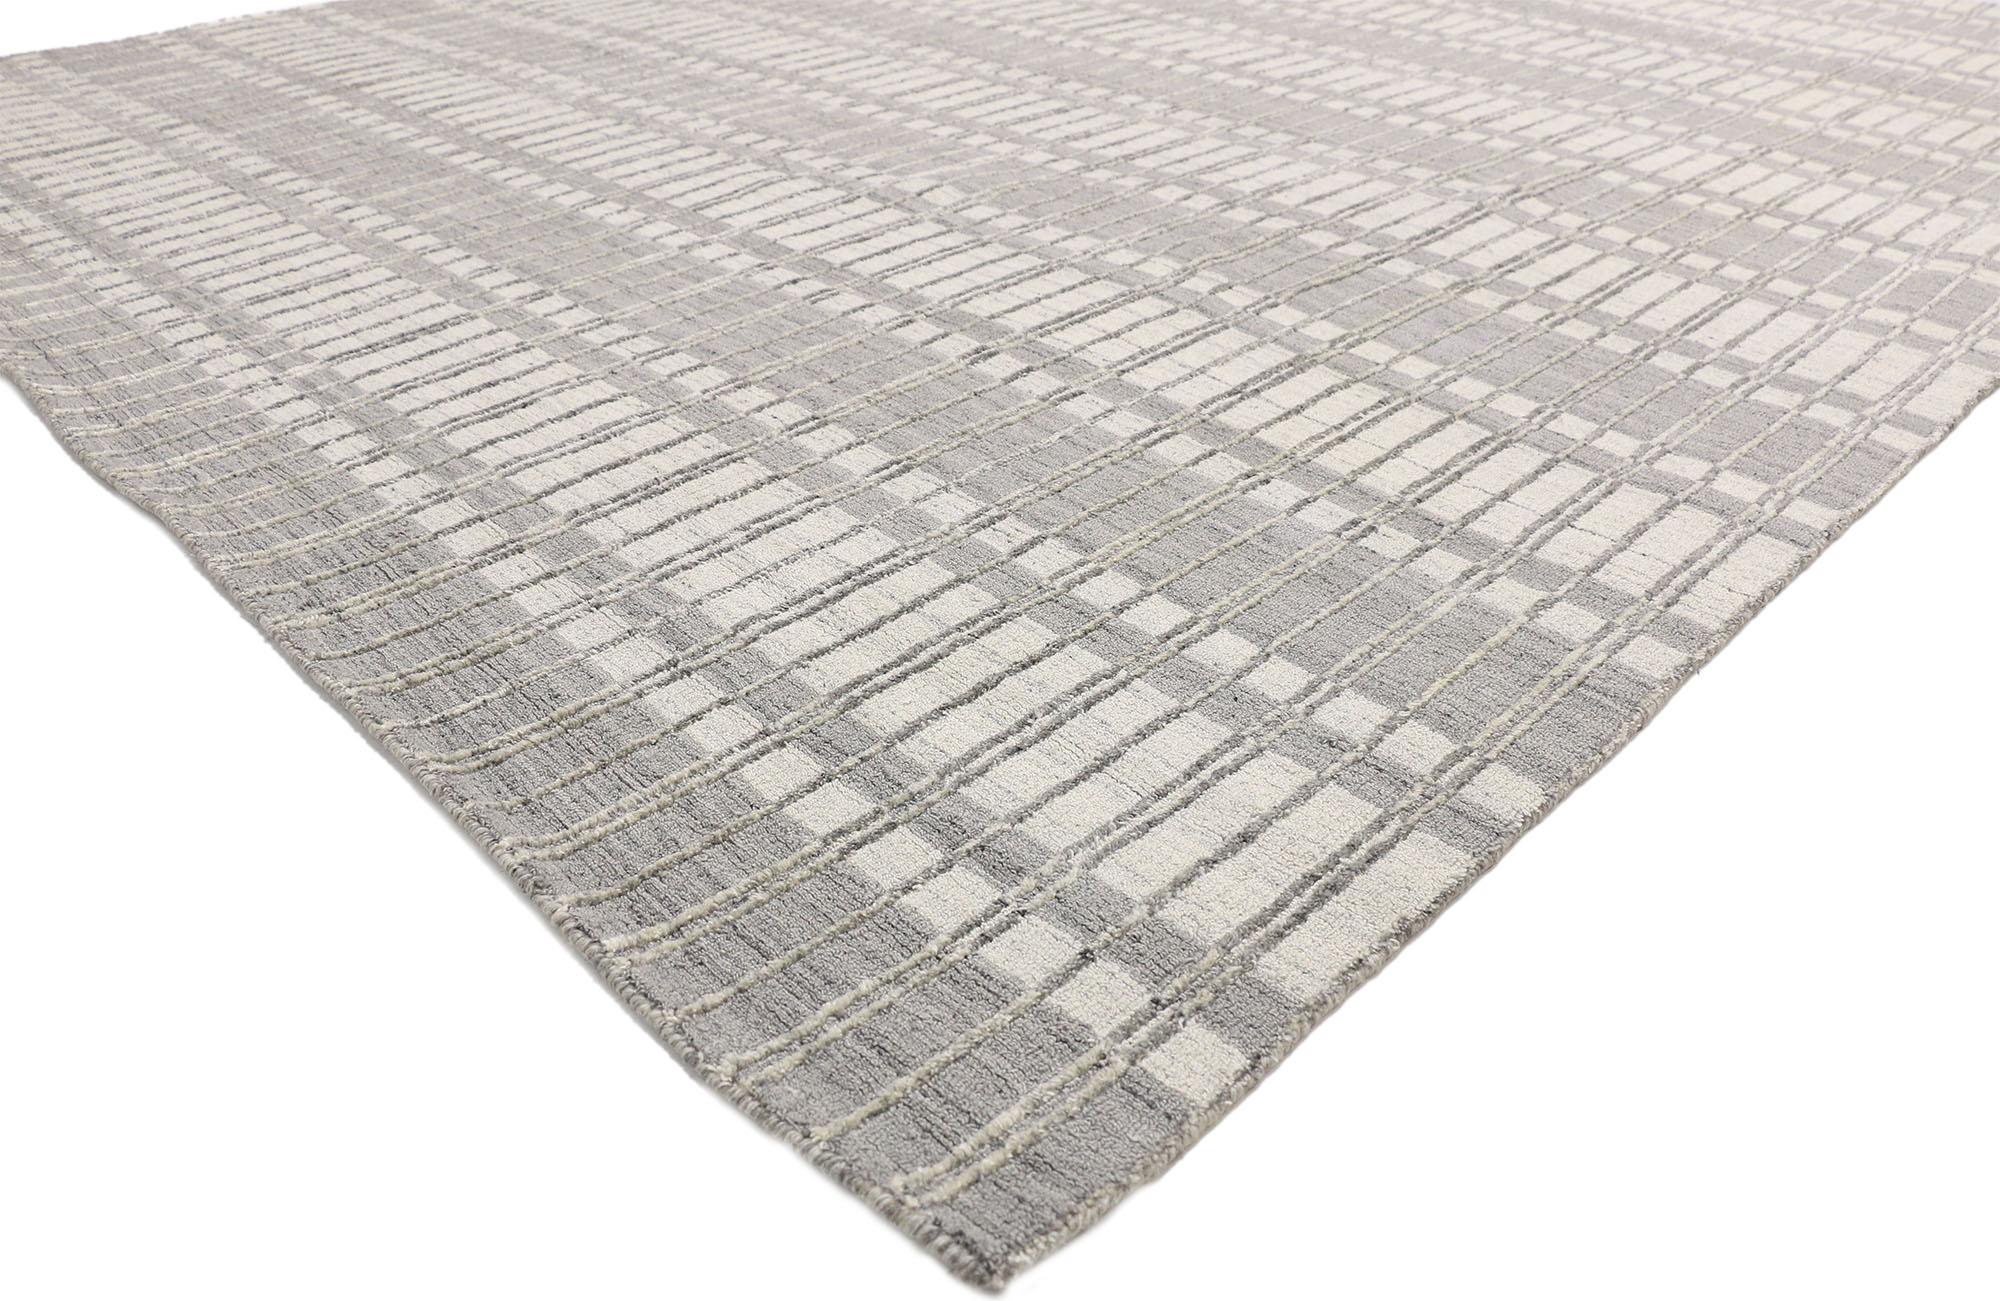 30447, New Transitional gray area rug with Scandinavian Modern style and Danish design. Contemporary elegance meets midcentury appeal in this superb transitional grey area rug with modern Swedish style. Invite the beauty of this transitional rug